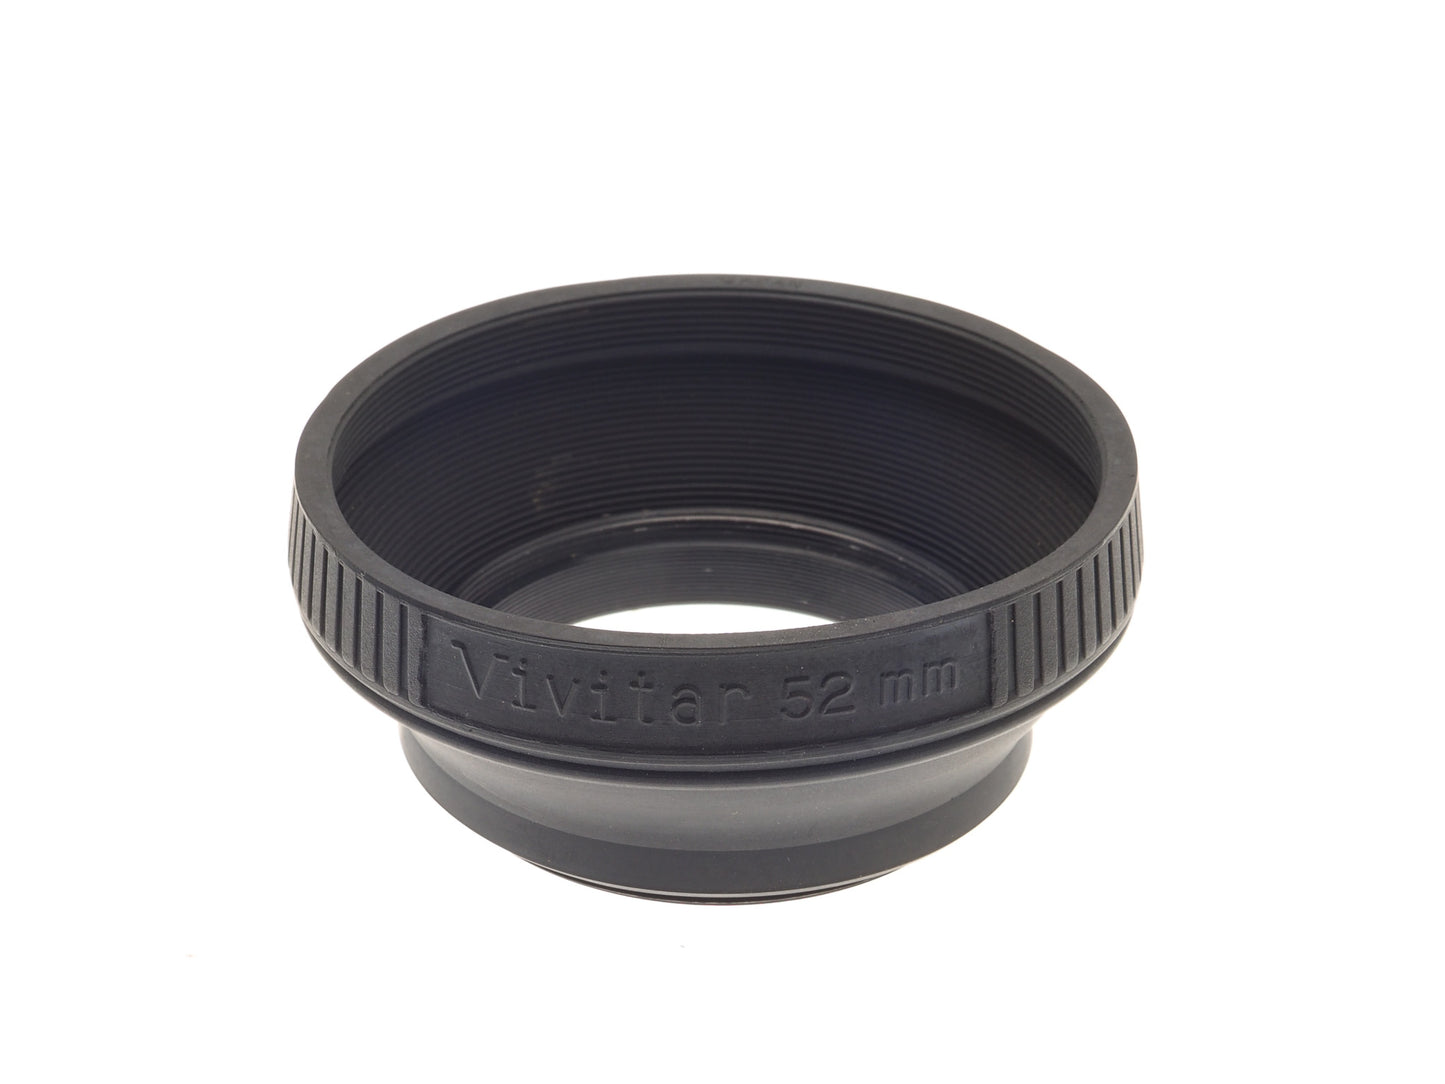 Vivitar 52mm Collapsible Lens Hood - Accessory